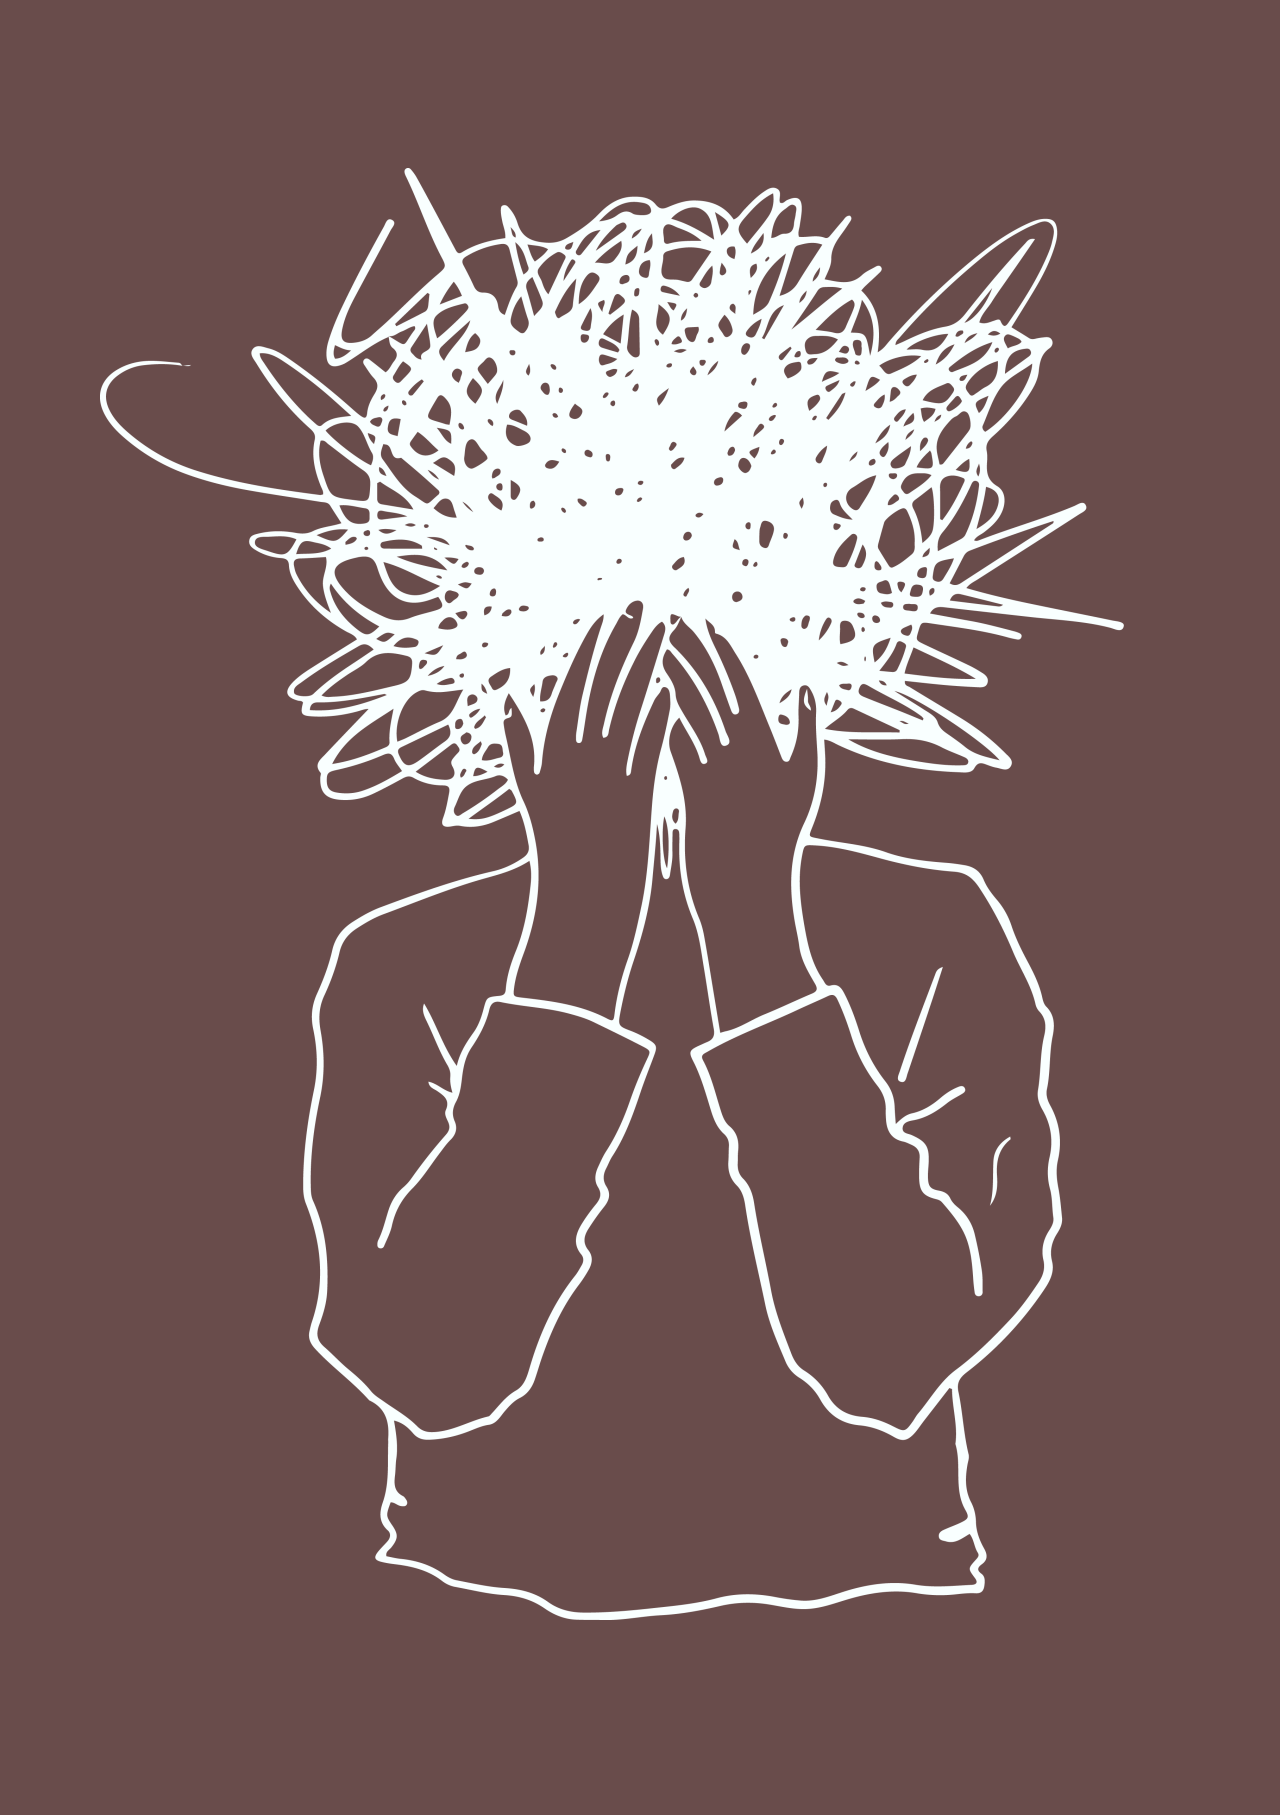 simple outline sketch of a man with hands pressed to his face. His head is a mass of scribbles and squiggles.